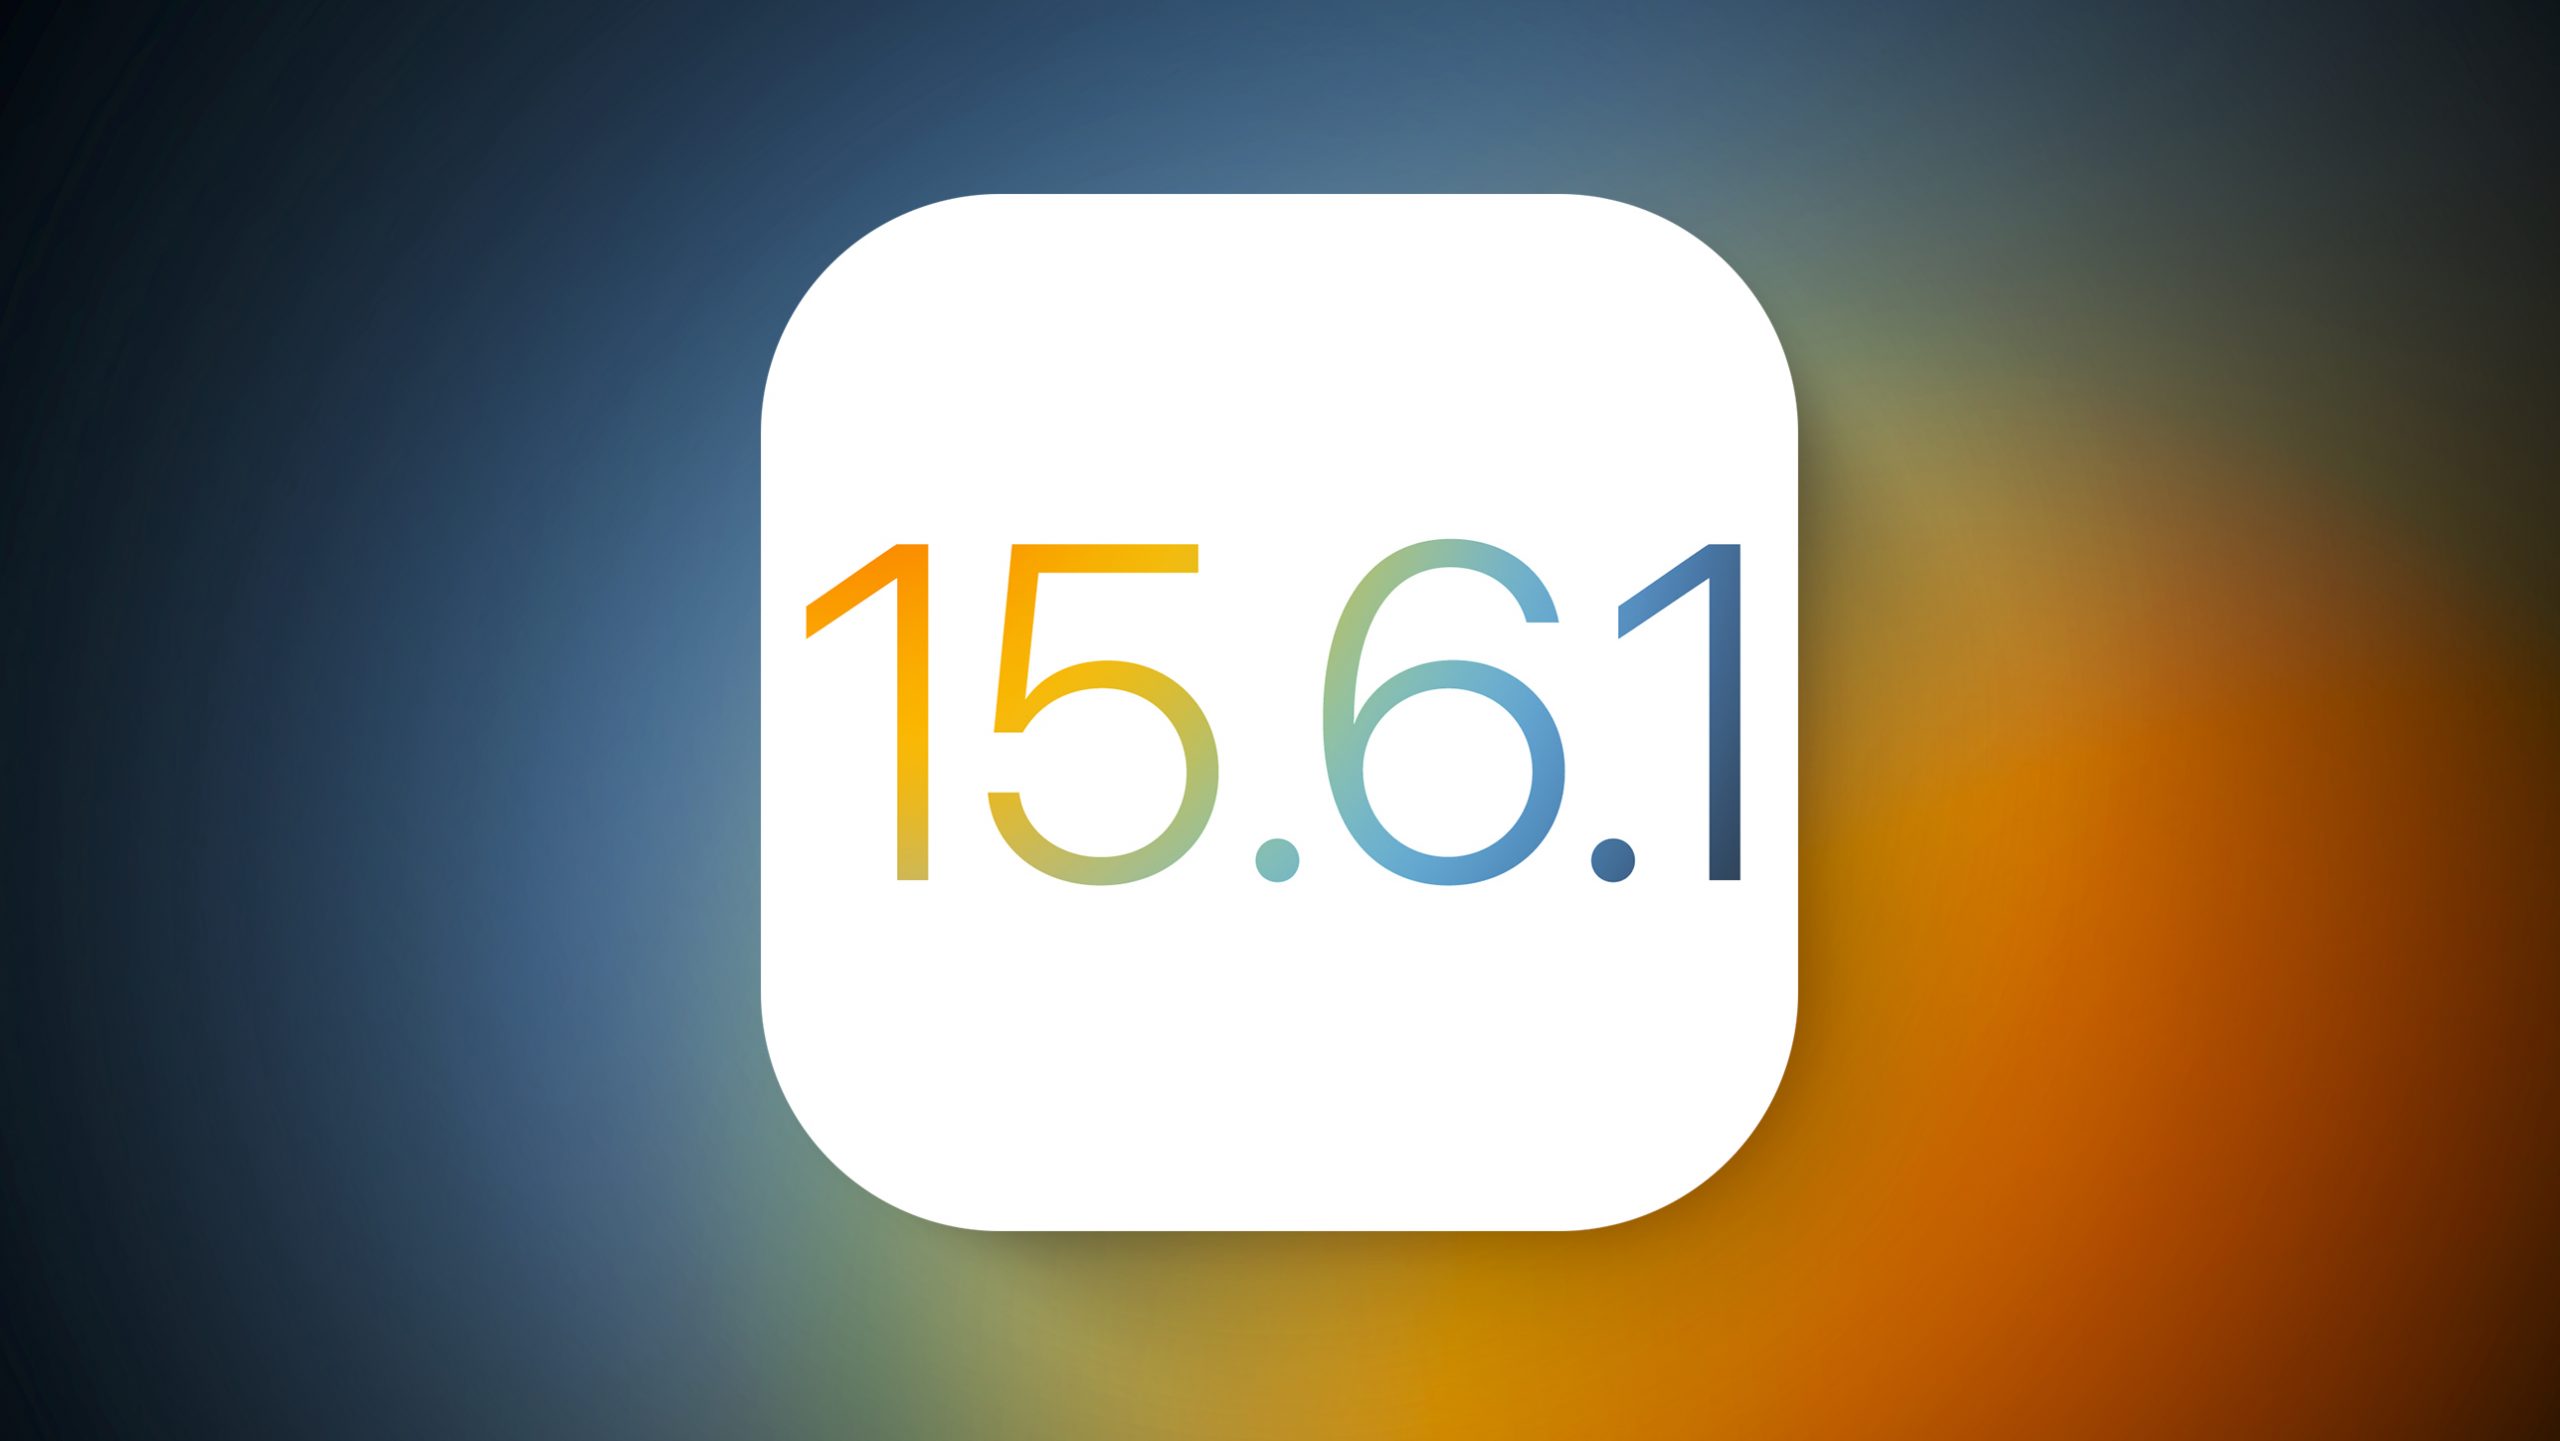 Apple Stops Signing iOS 15.6 Following iOS 15.6.1 Release, Downgrading No Longer Possible